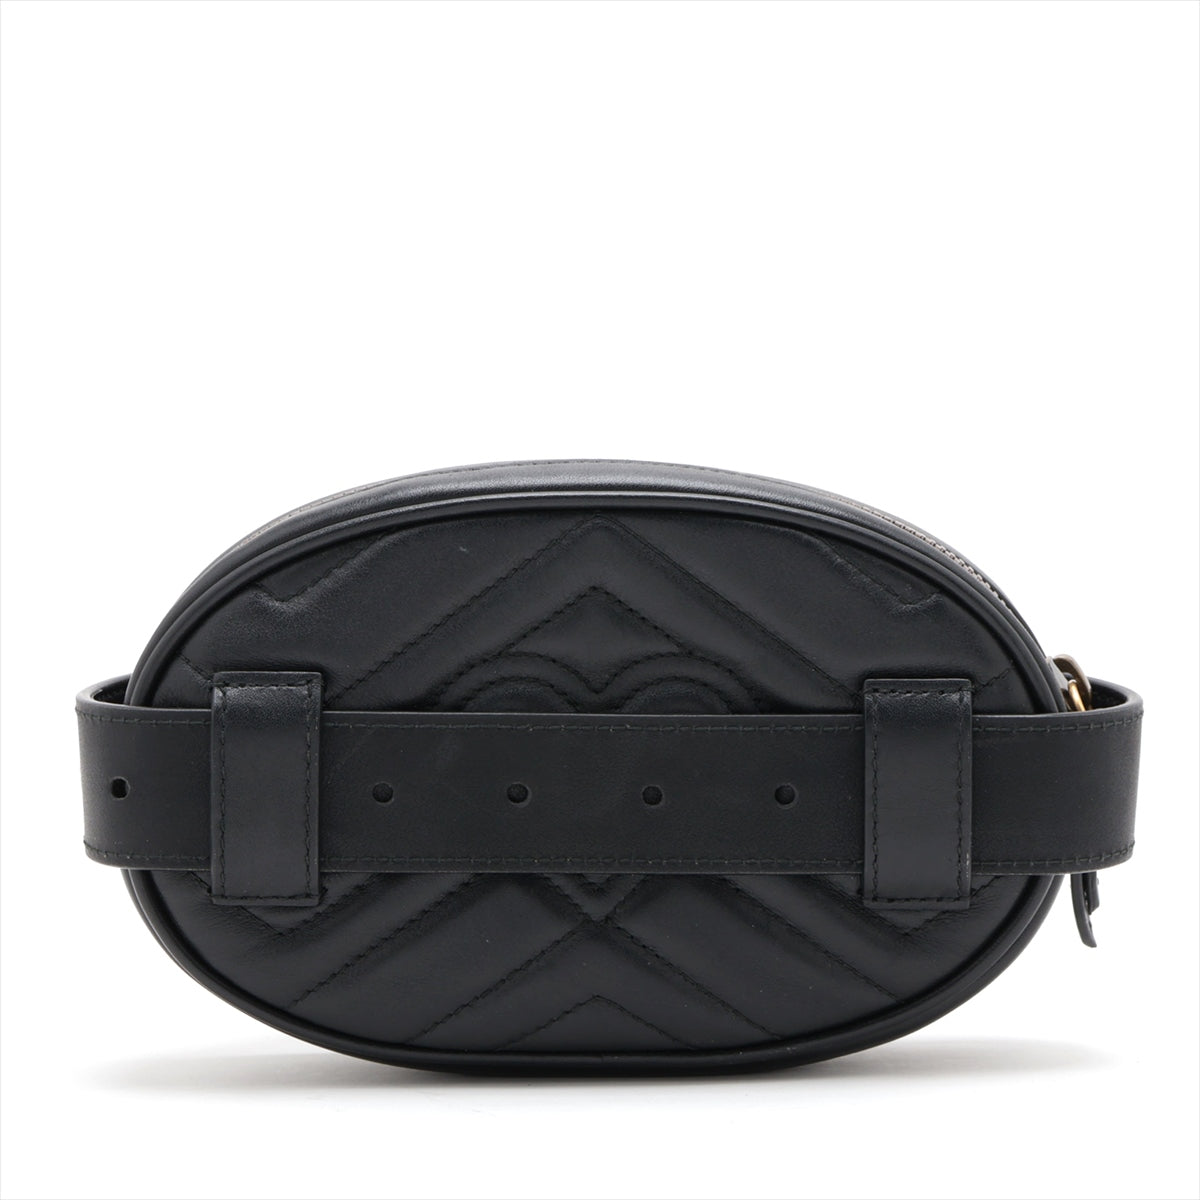 GUCCI Marmont Belt Bag in Leather Black 476434 Ladies